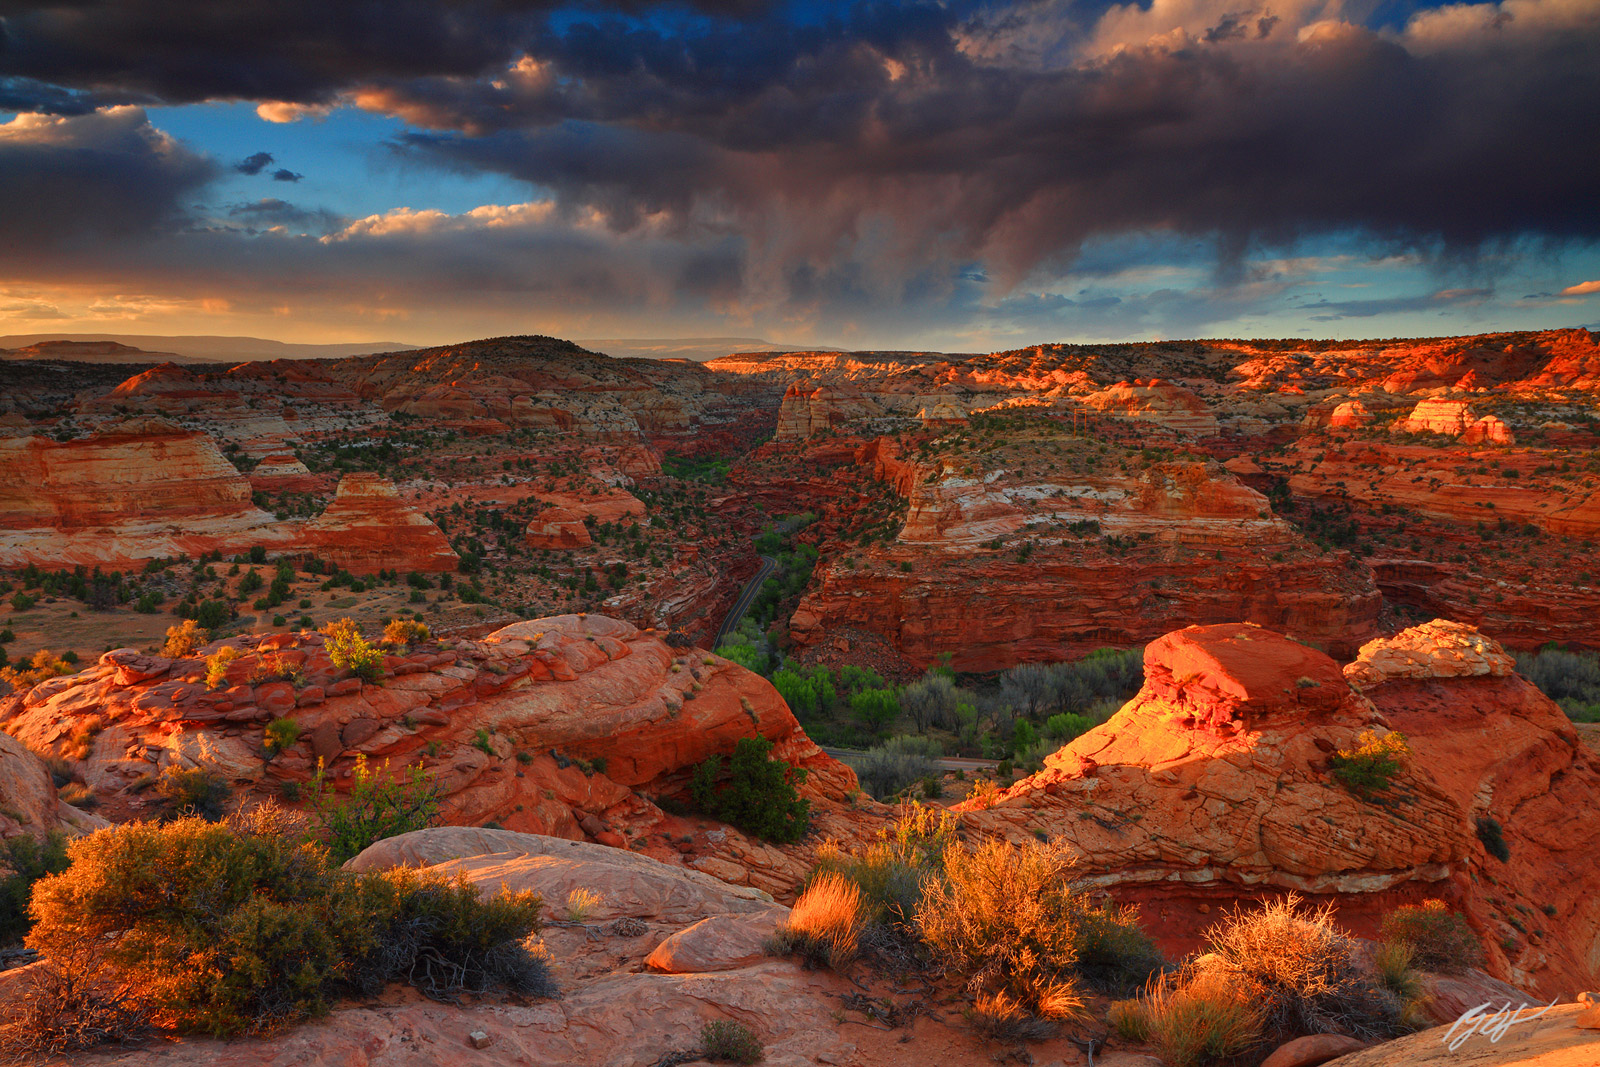 Sunset Over Escalante Canyon in Escalante National Monument in Utah